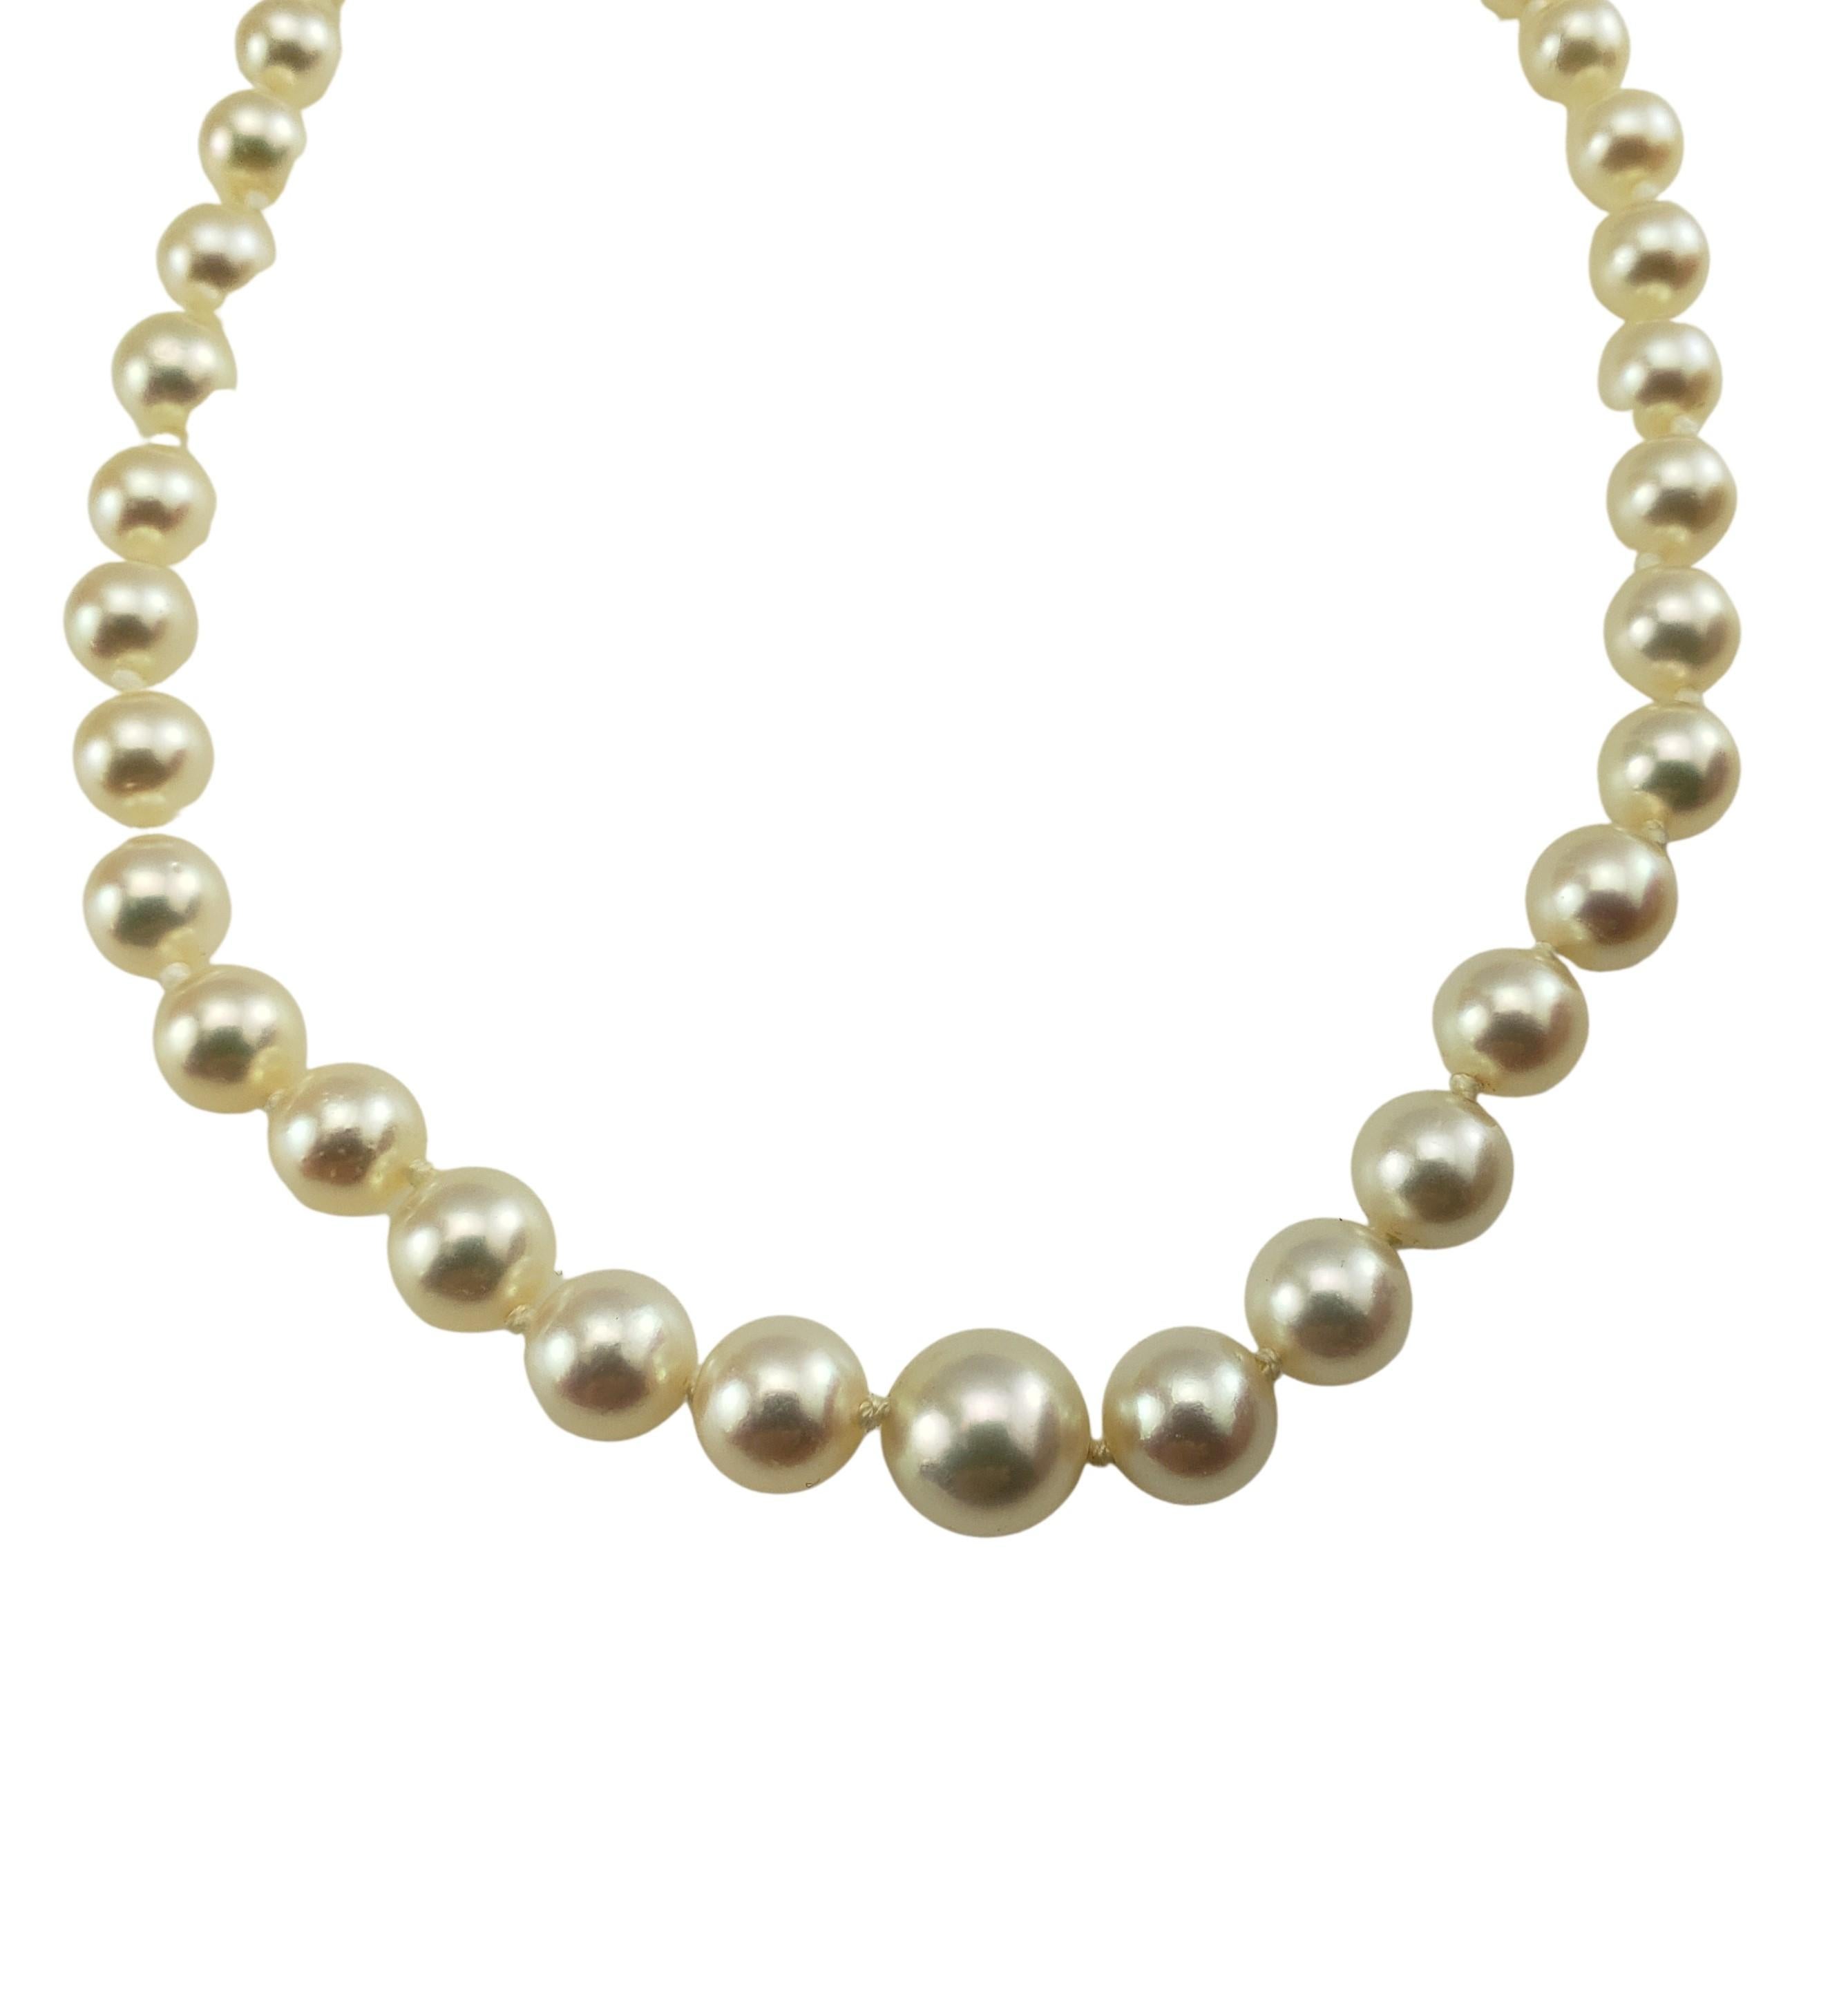 Vintage Graduated Cultured Pearl Necklace with 14 Karat White Gold ...